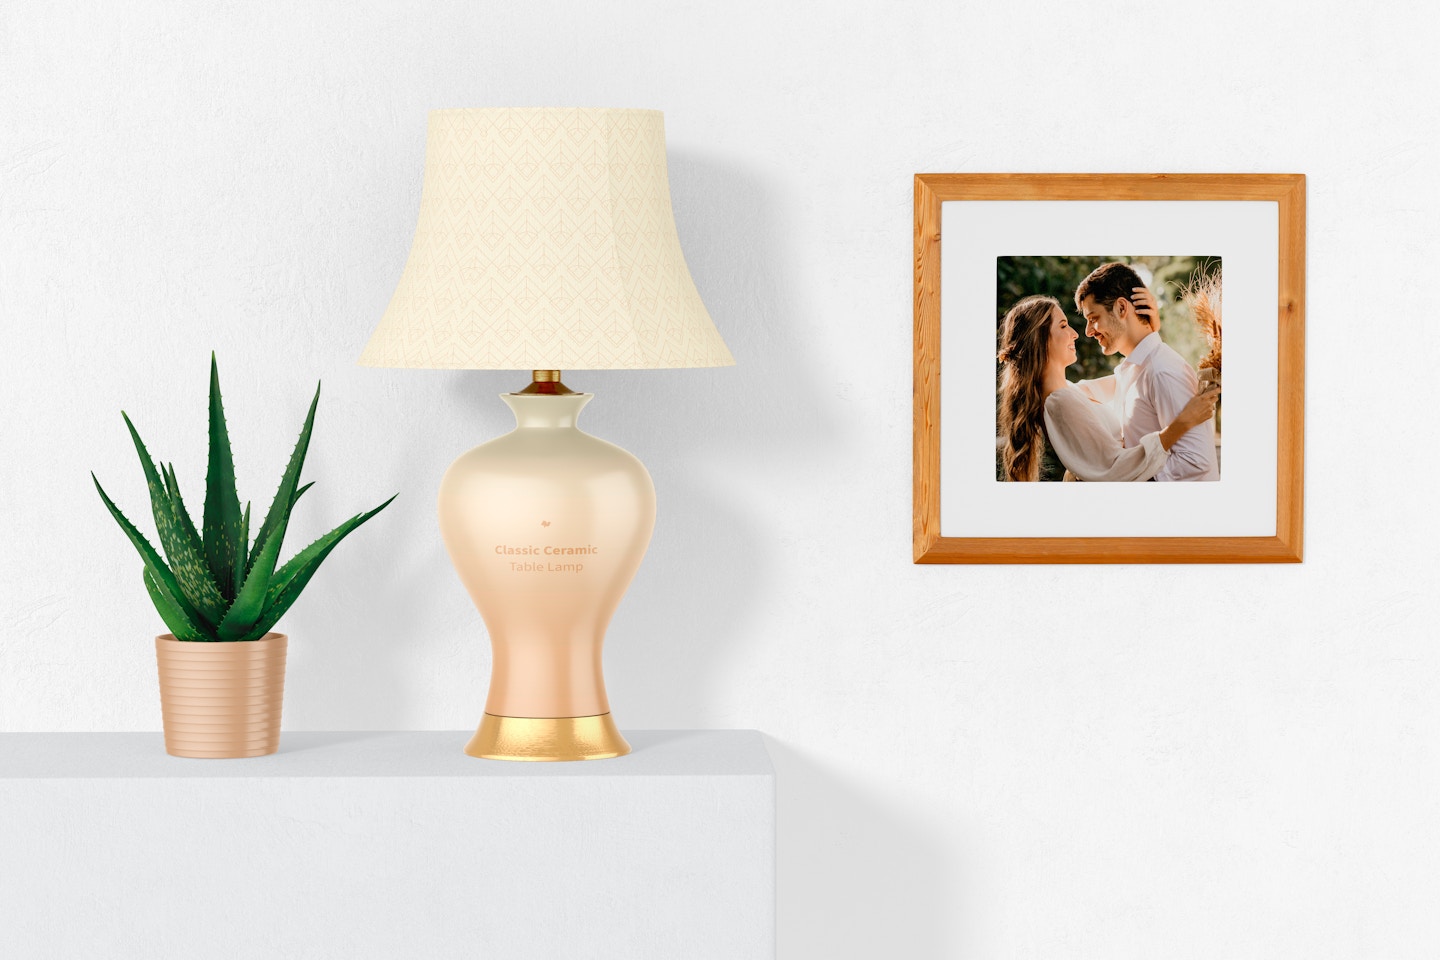 Classic Ceramic Table Lamp with a Frame Mockup